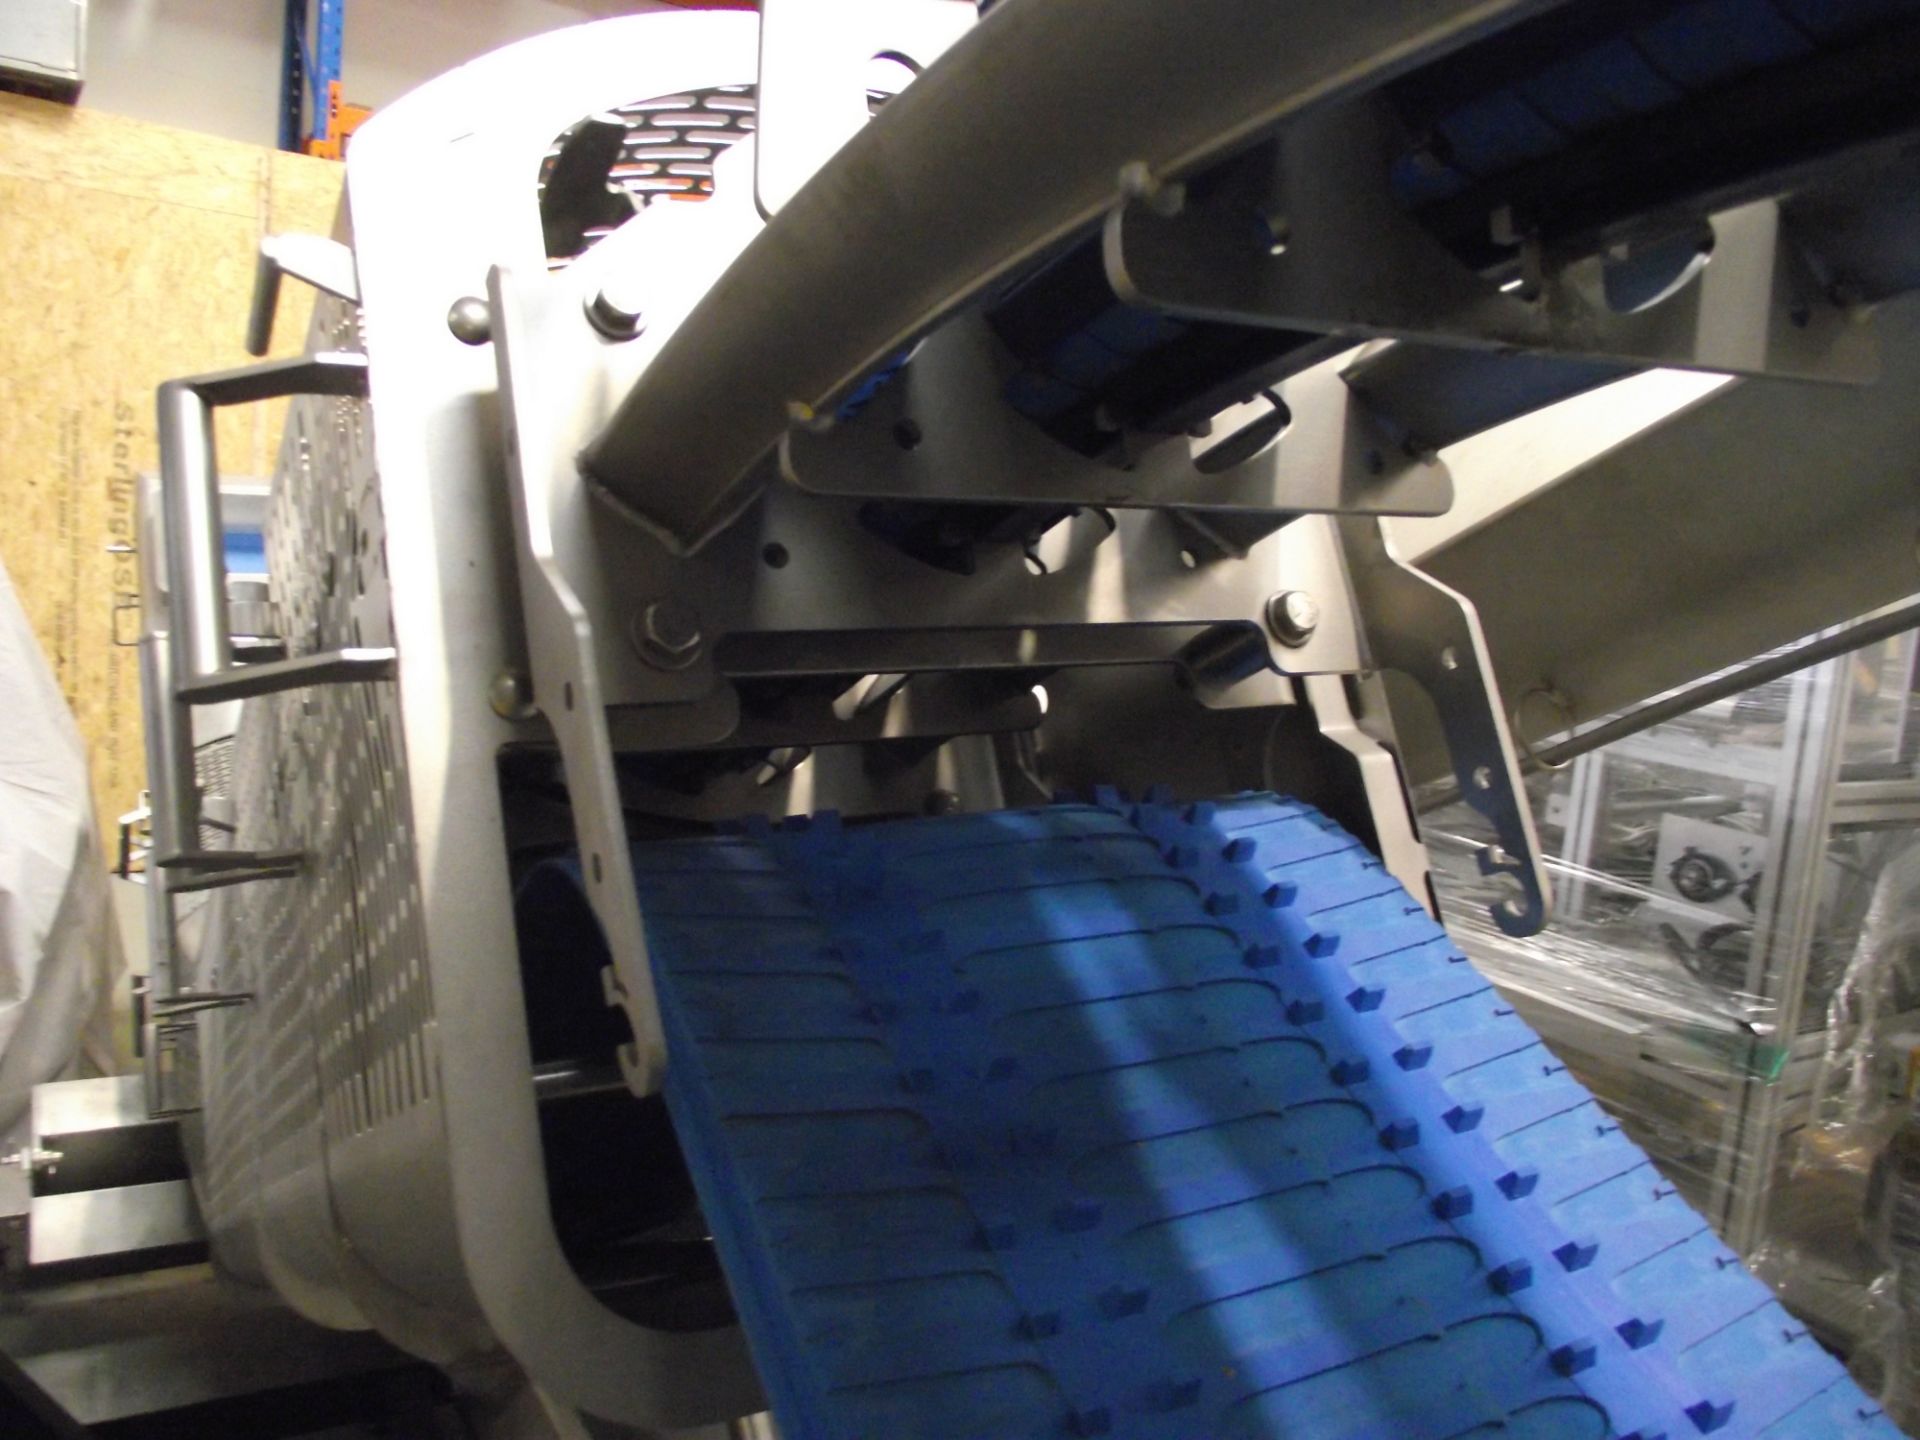 Liftvrac Inclined Conveyor & Bagging System - Image 7 of 40